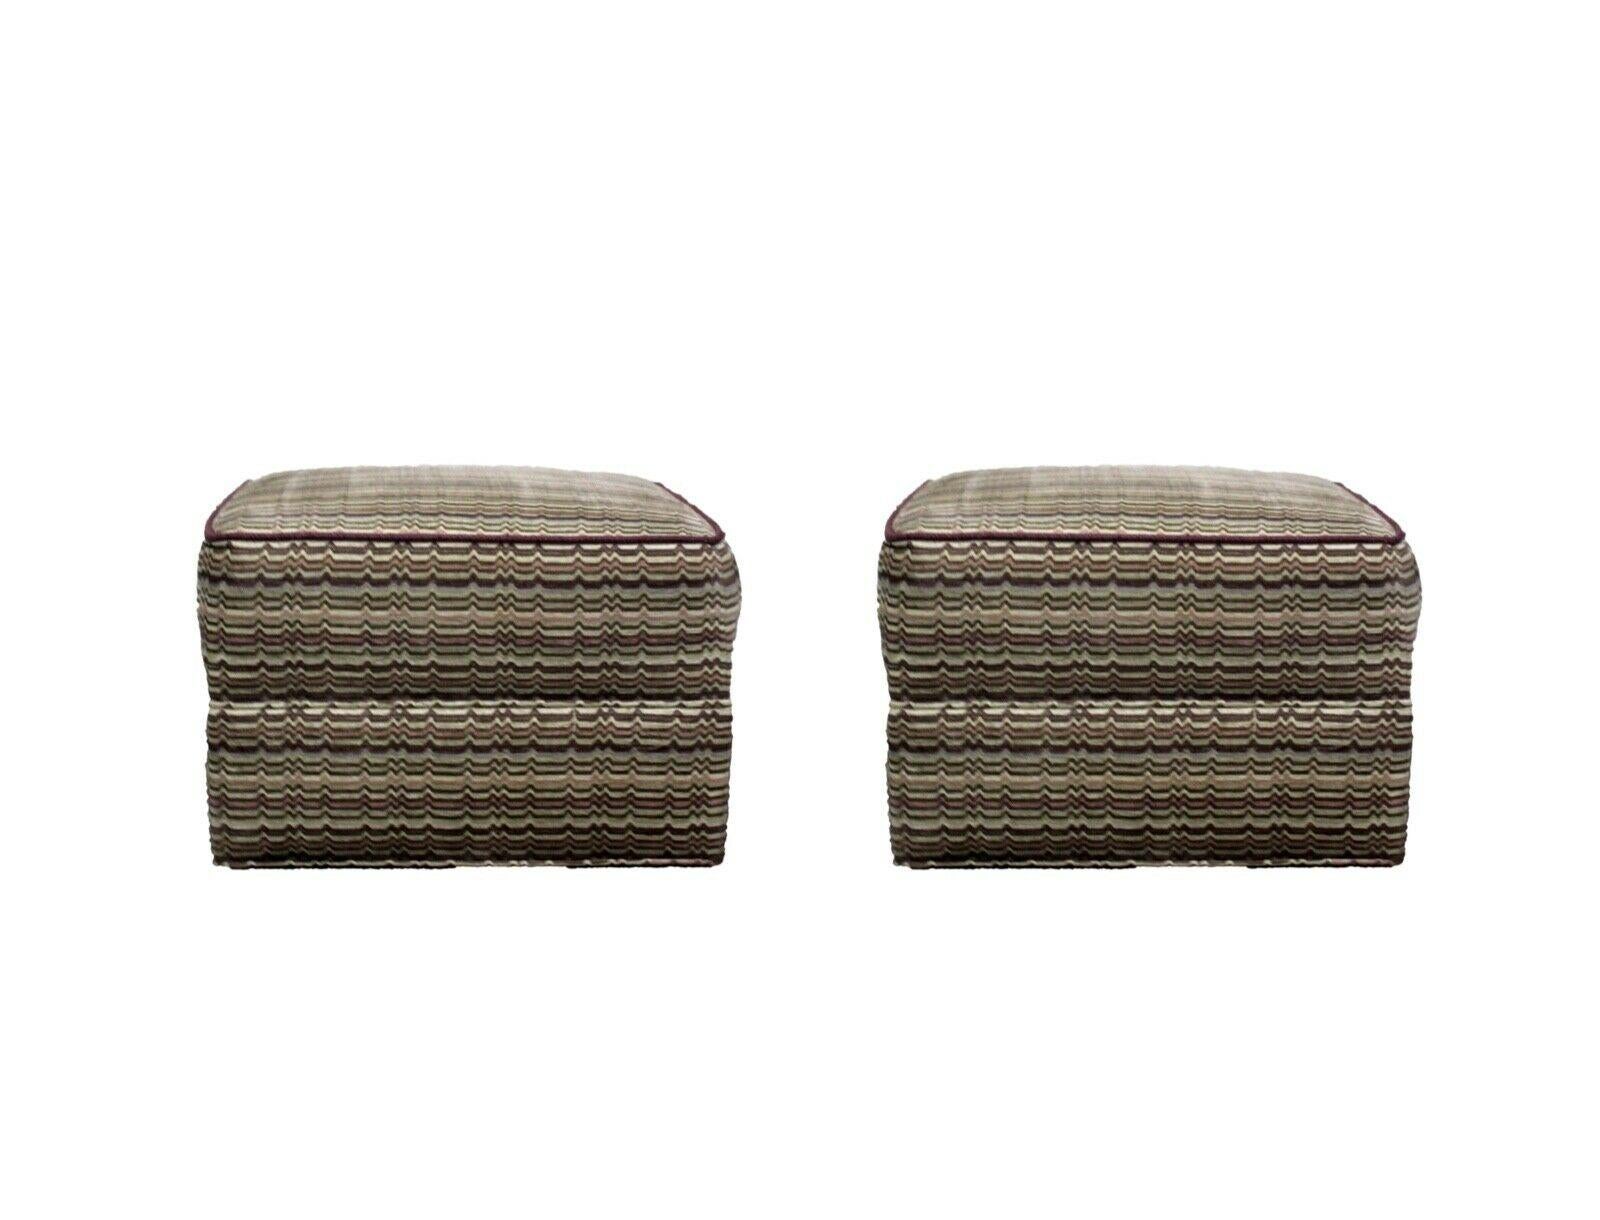 For your consideration is this pair of funky fresh Baughman style chevron pattern purple and grey ottomans. Dimensions: 25.5W x 24D x 16.5H.
 